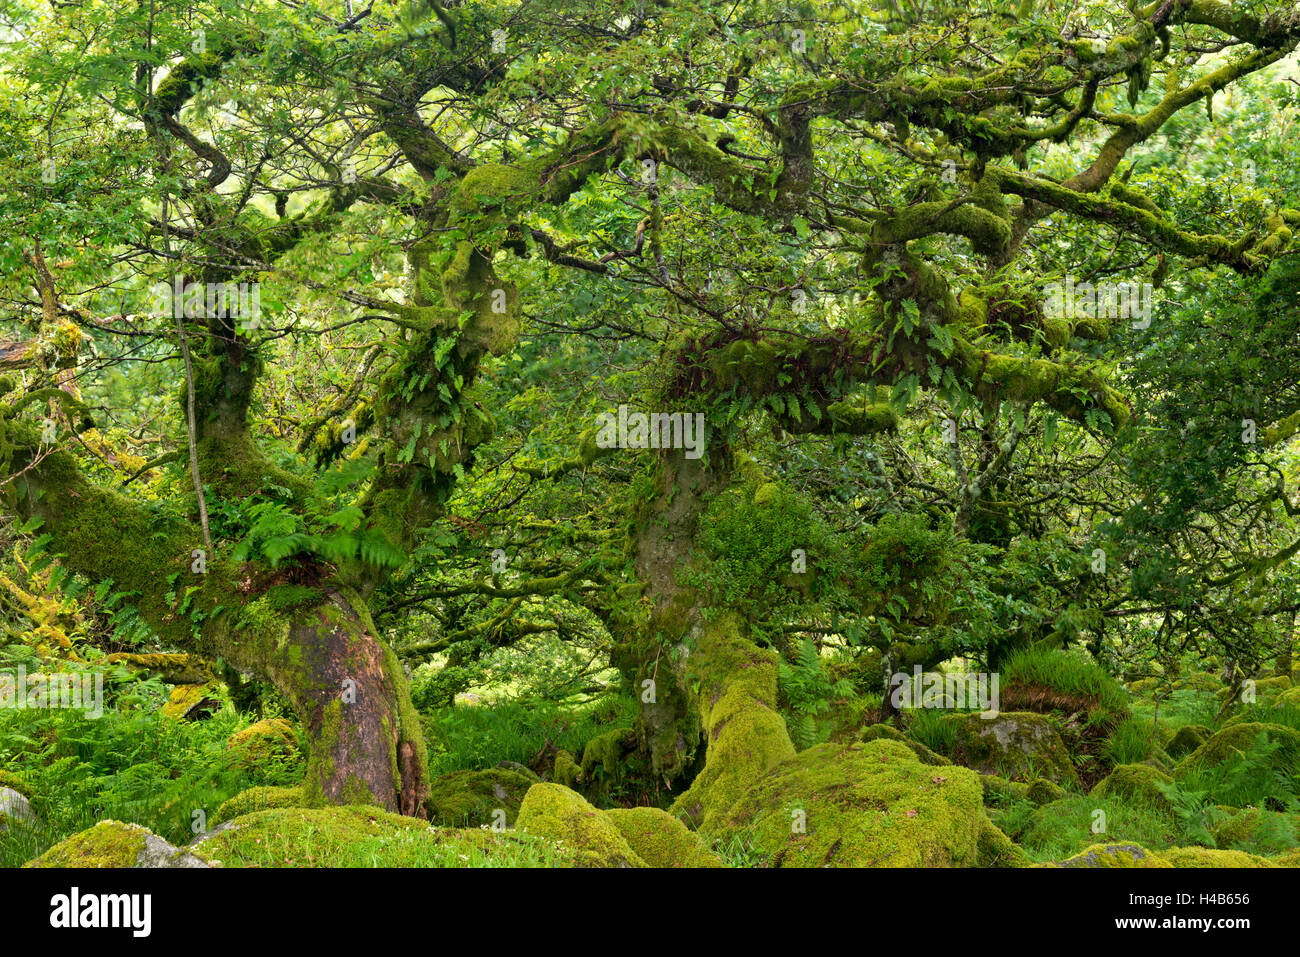 Gnarled lichen covered stunted oak trees growing in Wistman's Wood, Dartmoor National Park, Devon, England. Stock Photo